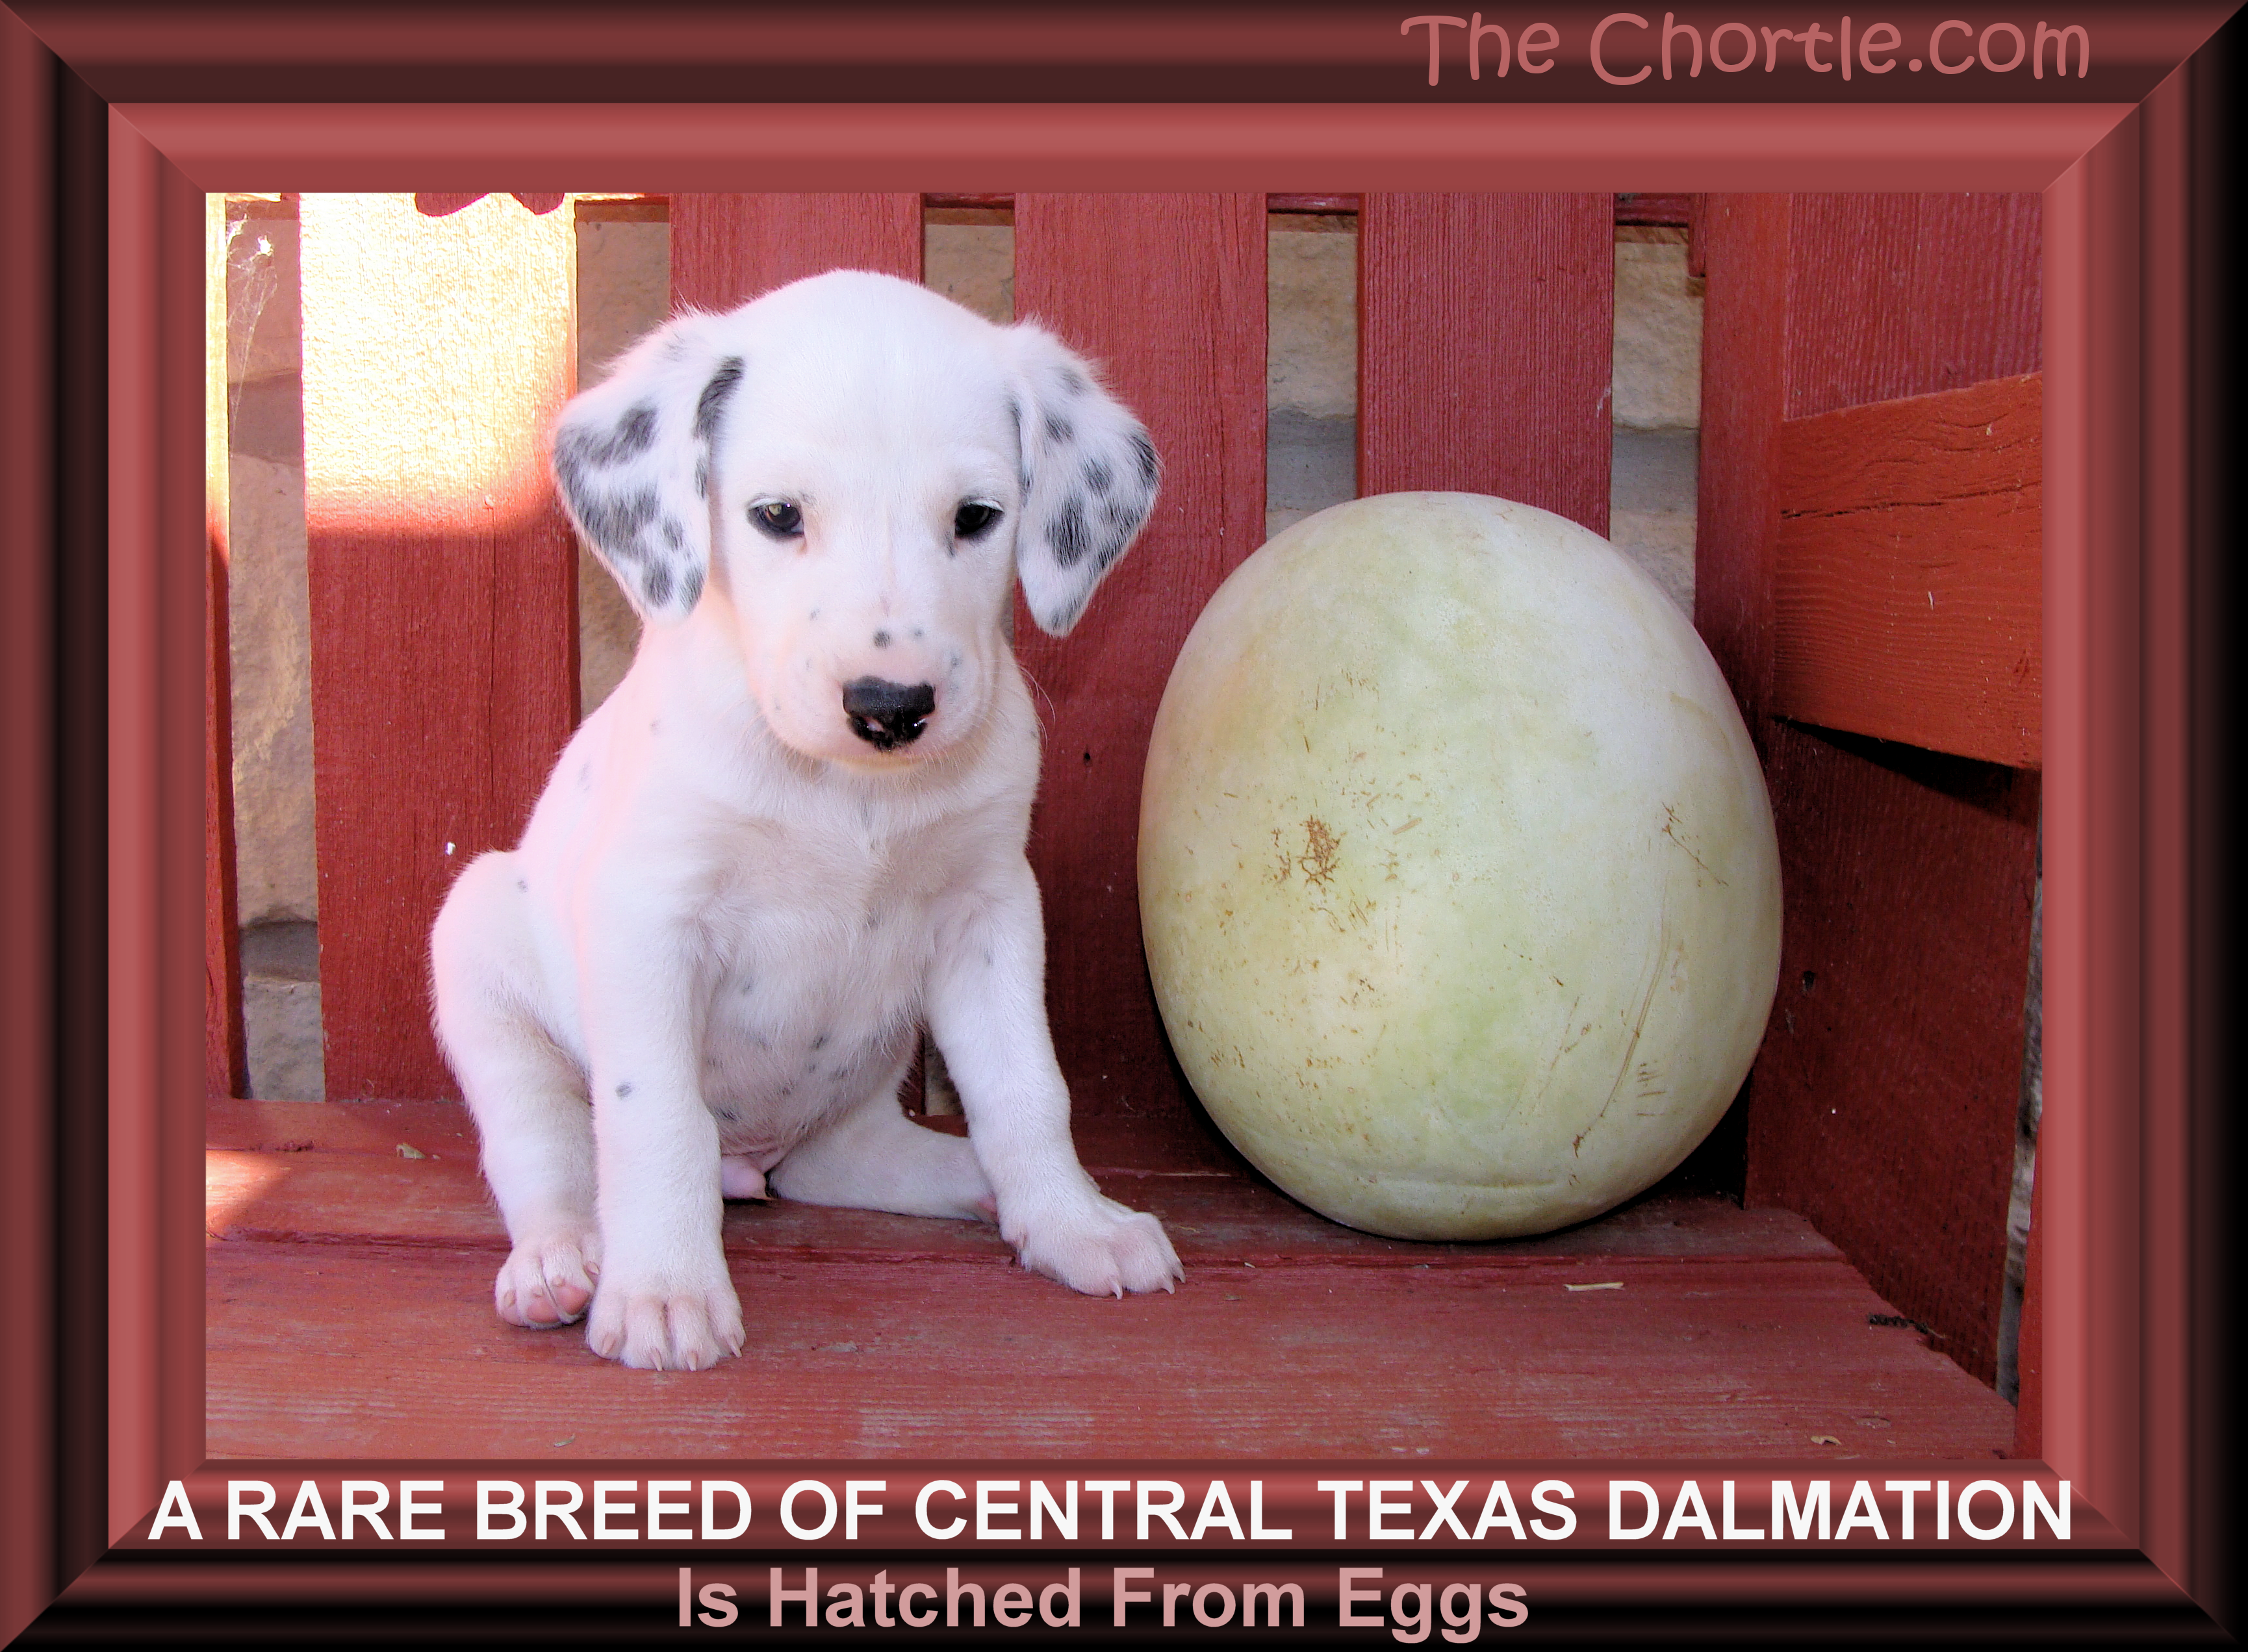 a RARE BREED OF CENTRAL tEXAS DALMATION IS HATCHED FROM EGGS